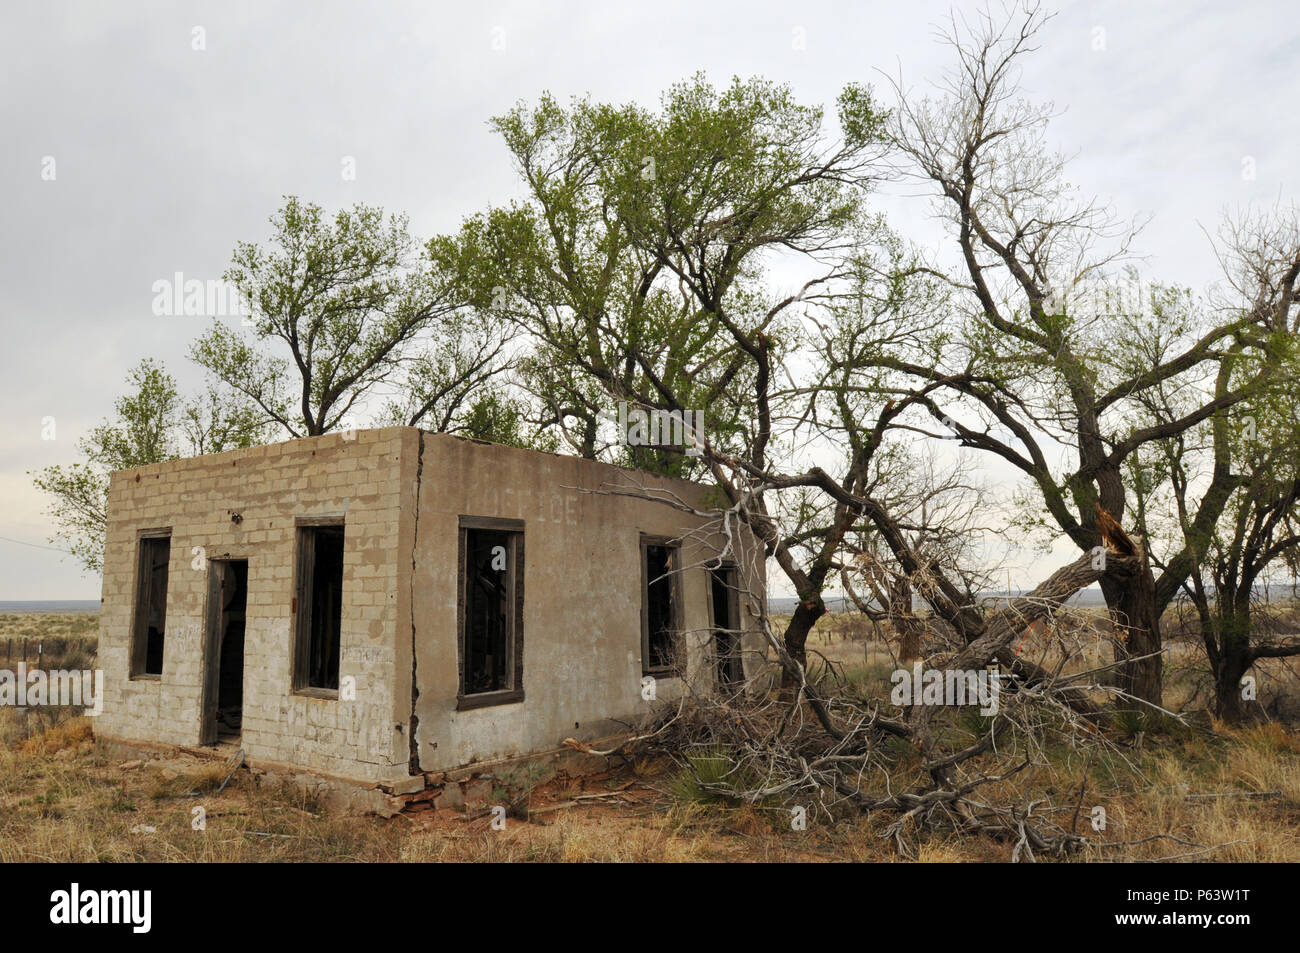 The former post office building stands surrounded by trees in the Route 66 ghost town of Glenrio on the Texas-New Mexico border. Stock Photo